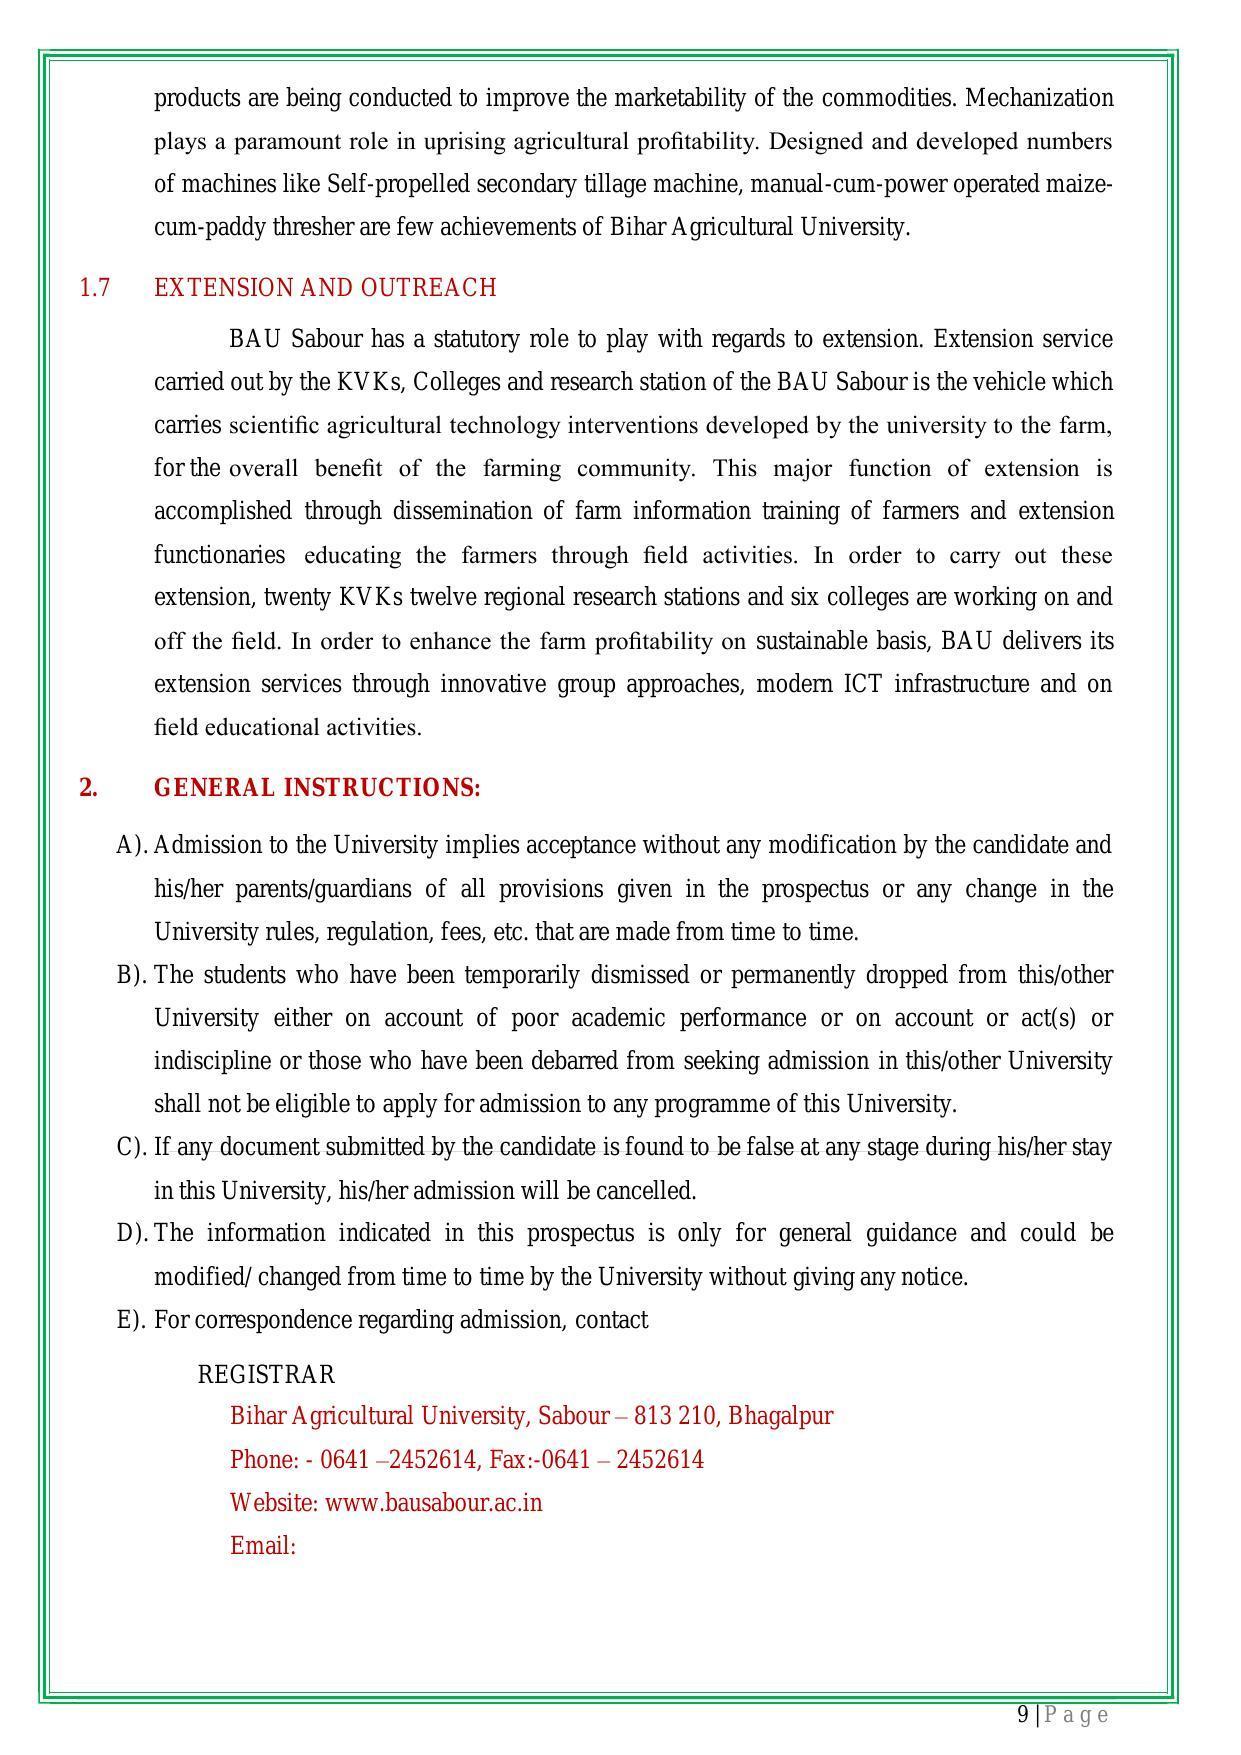 Bihar Agricultural University PG Entrance Exam - Page 10